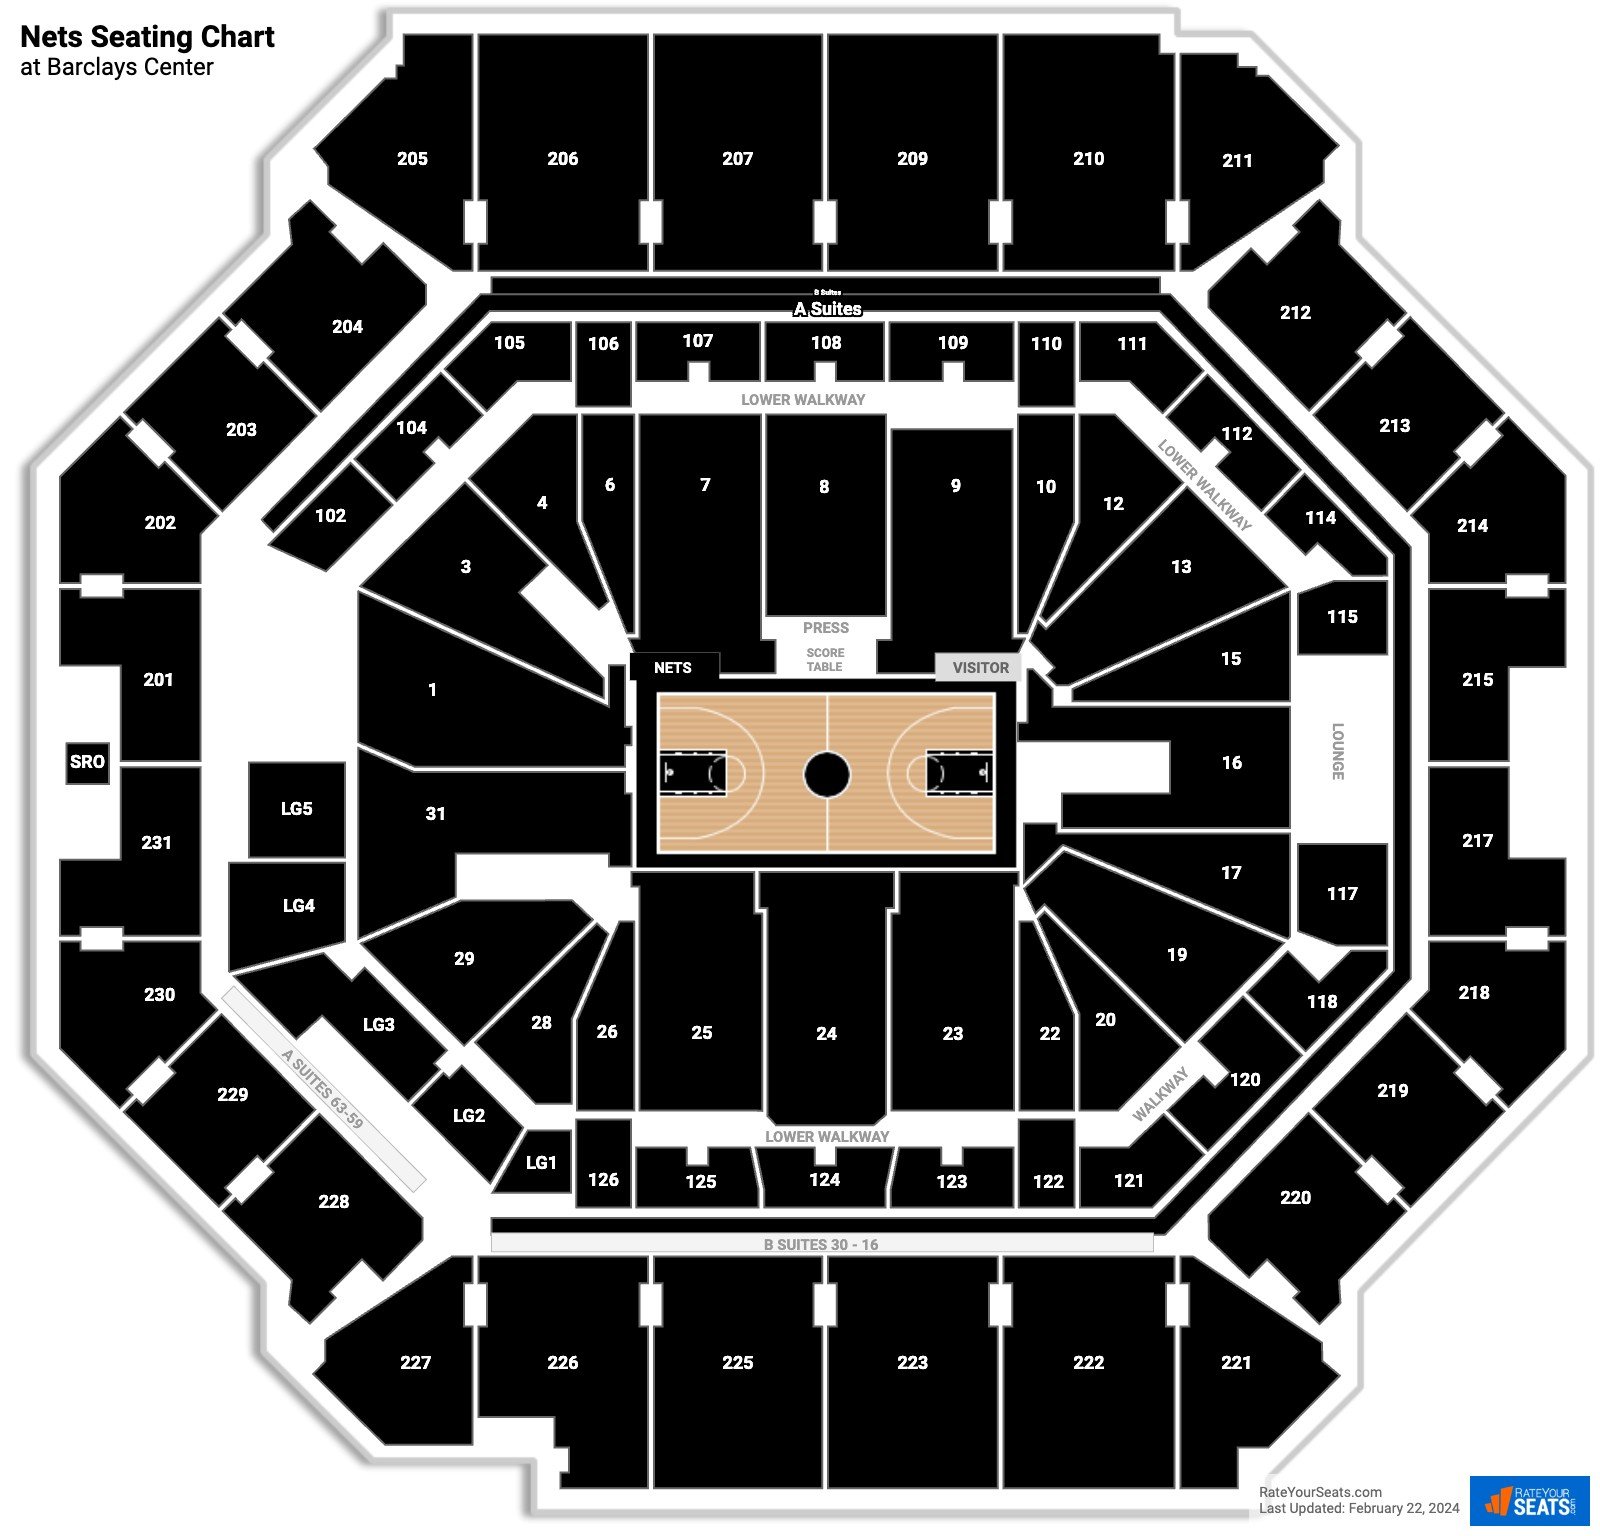 Brooklyn Nets Seating Chart at Barclays Center